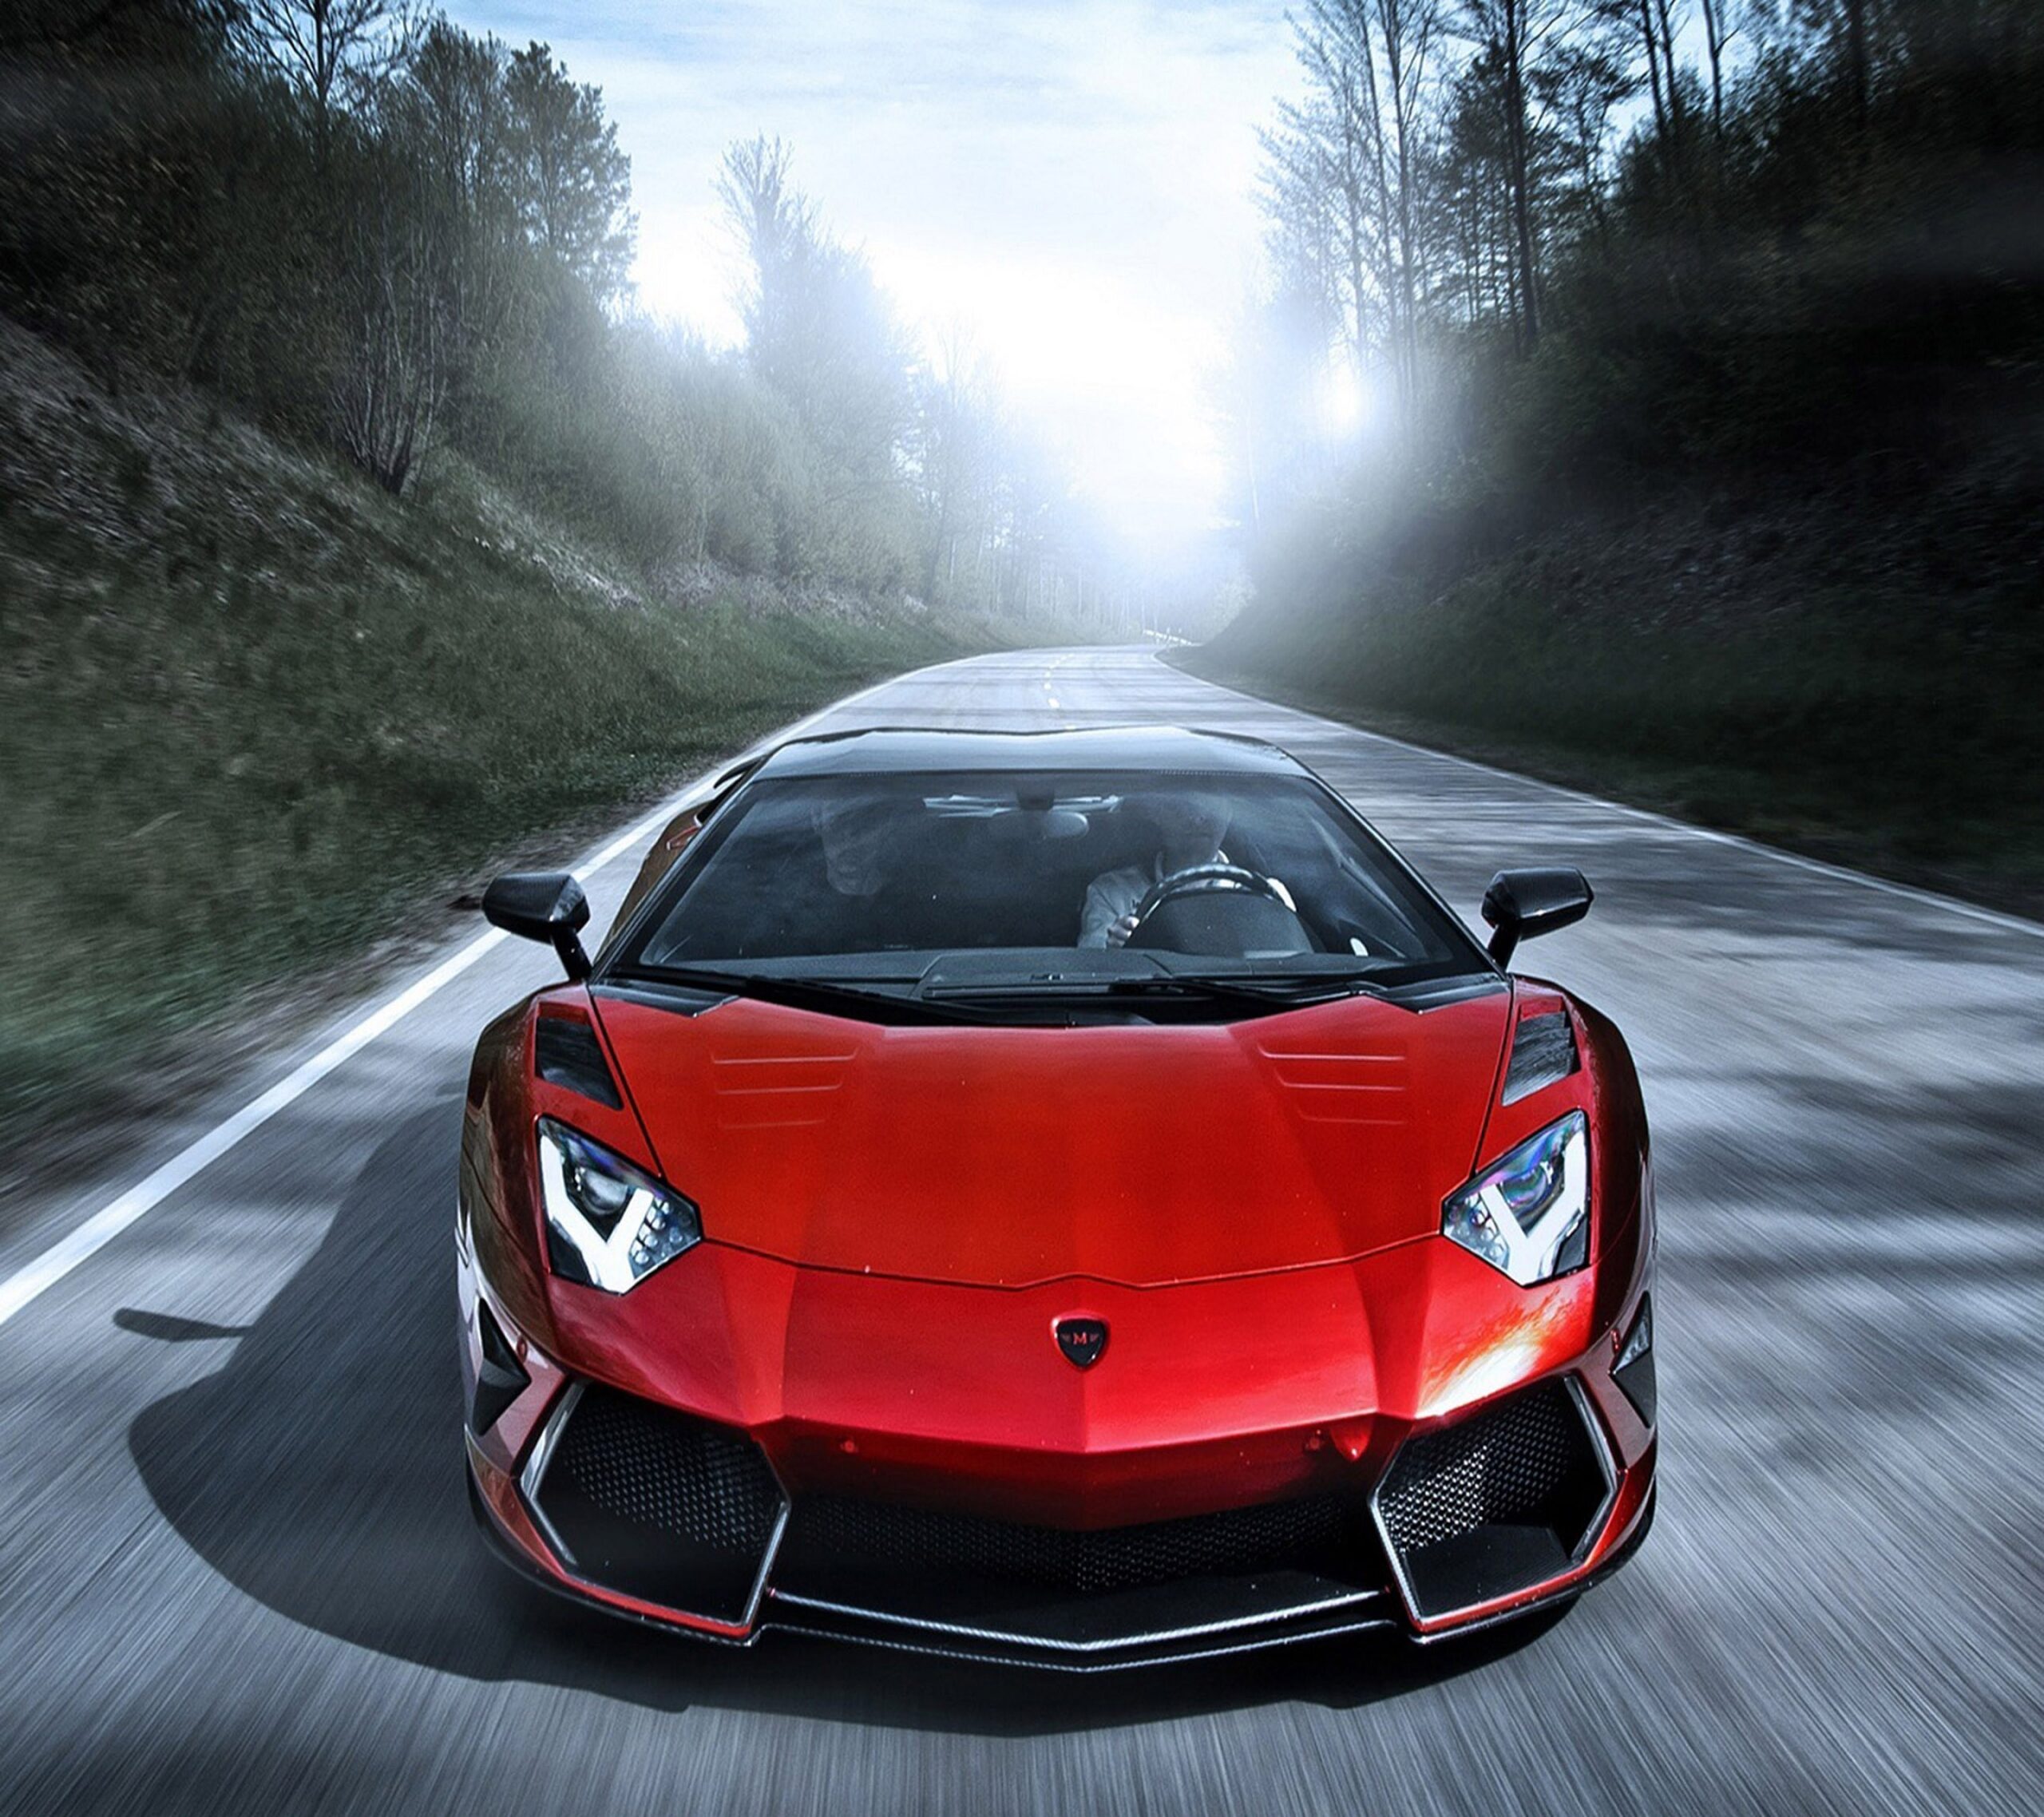 5 57279 red lamborghini wallpaper lamborghini wallpaper red and black scaled